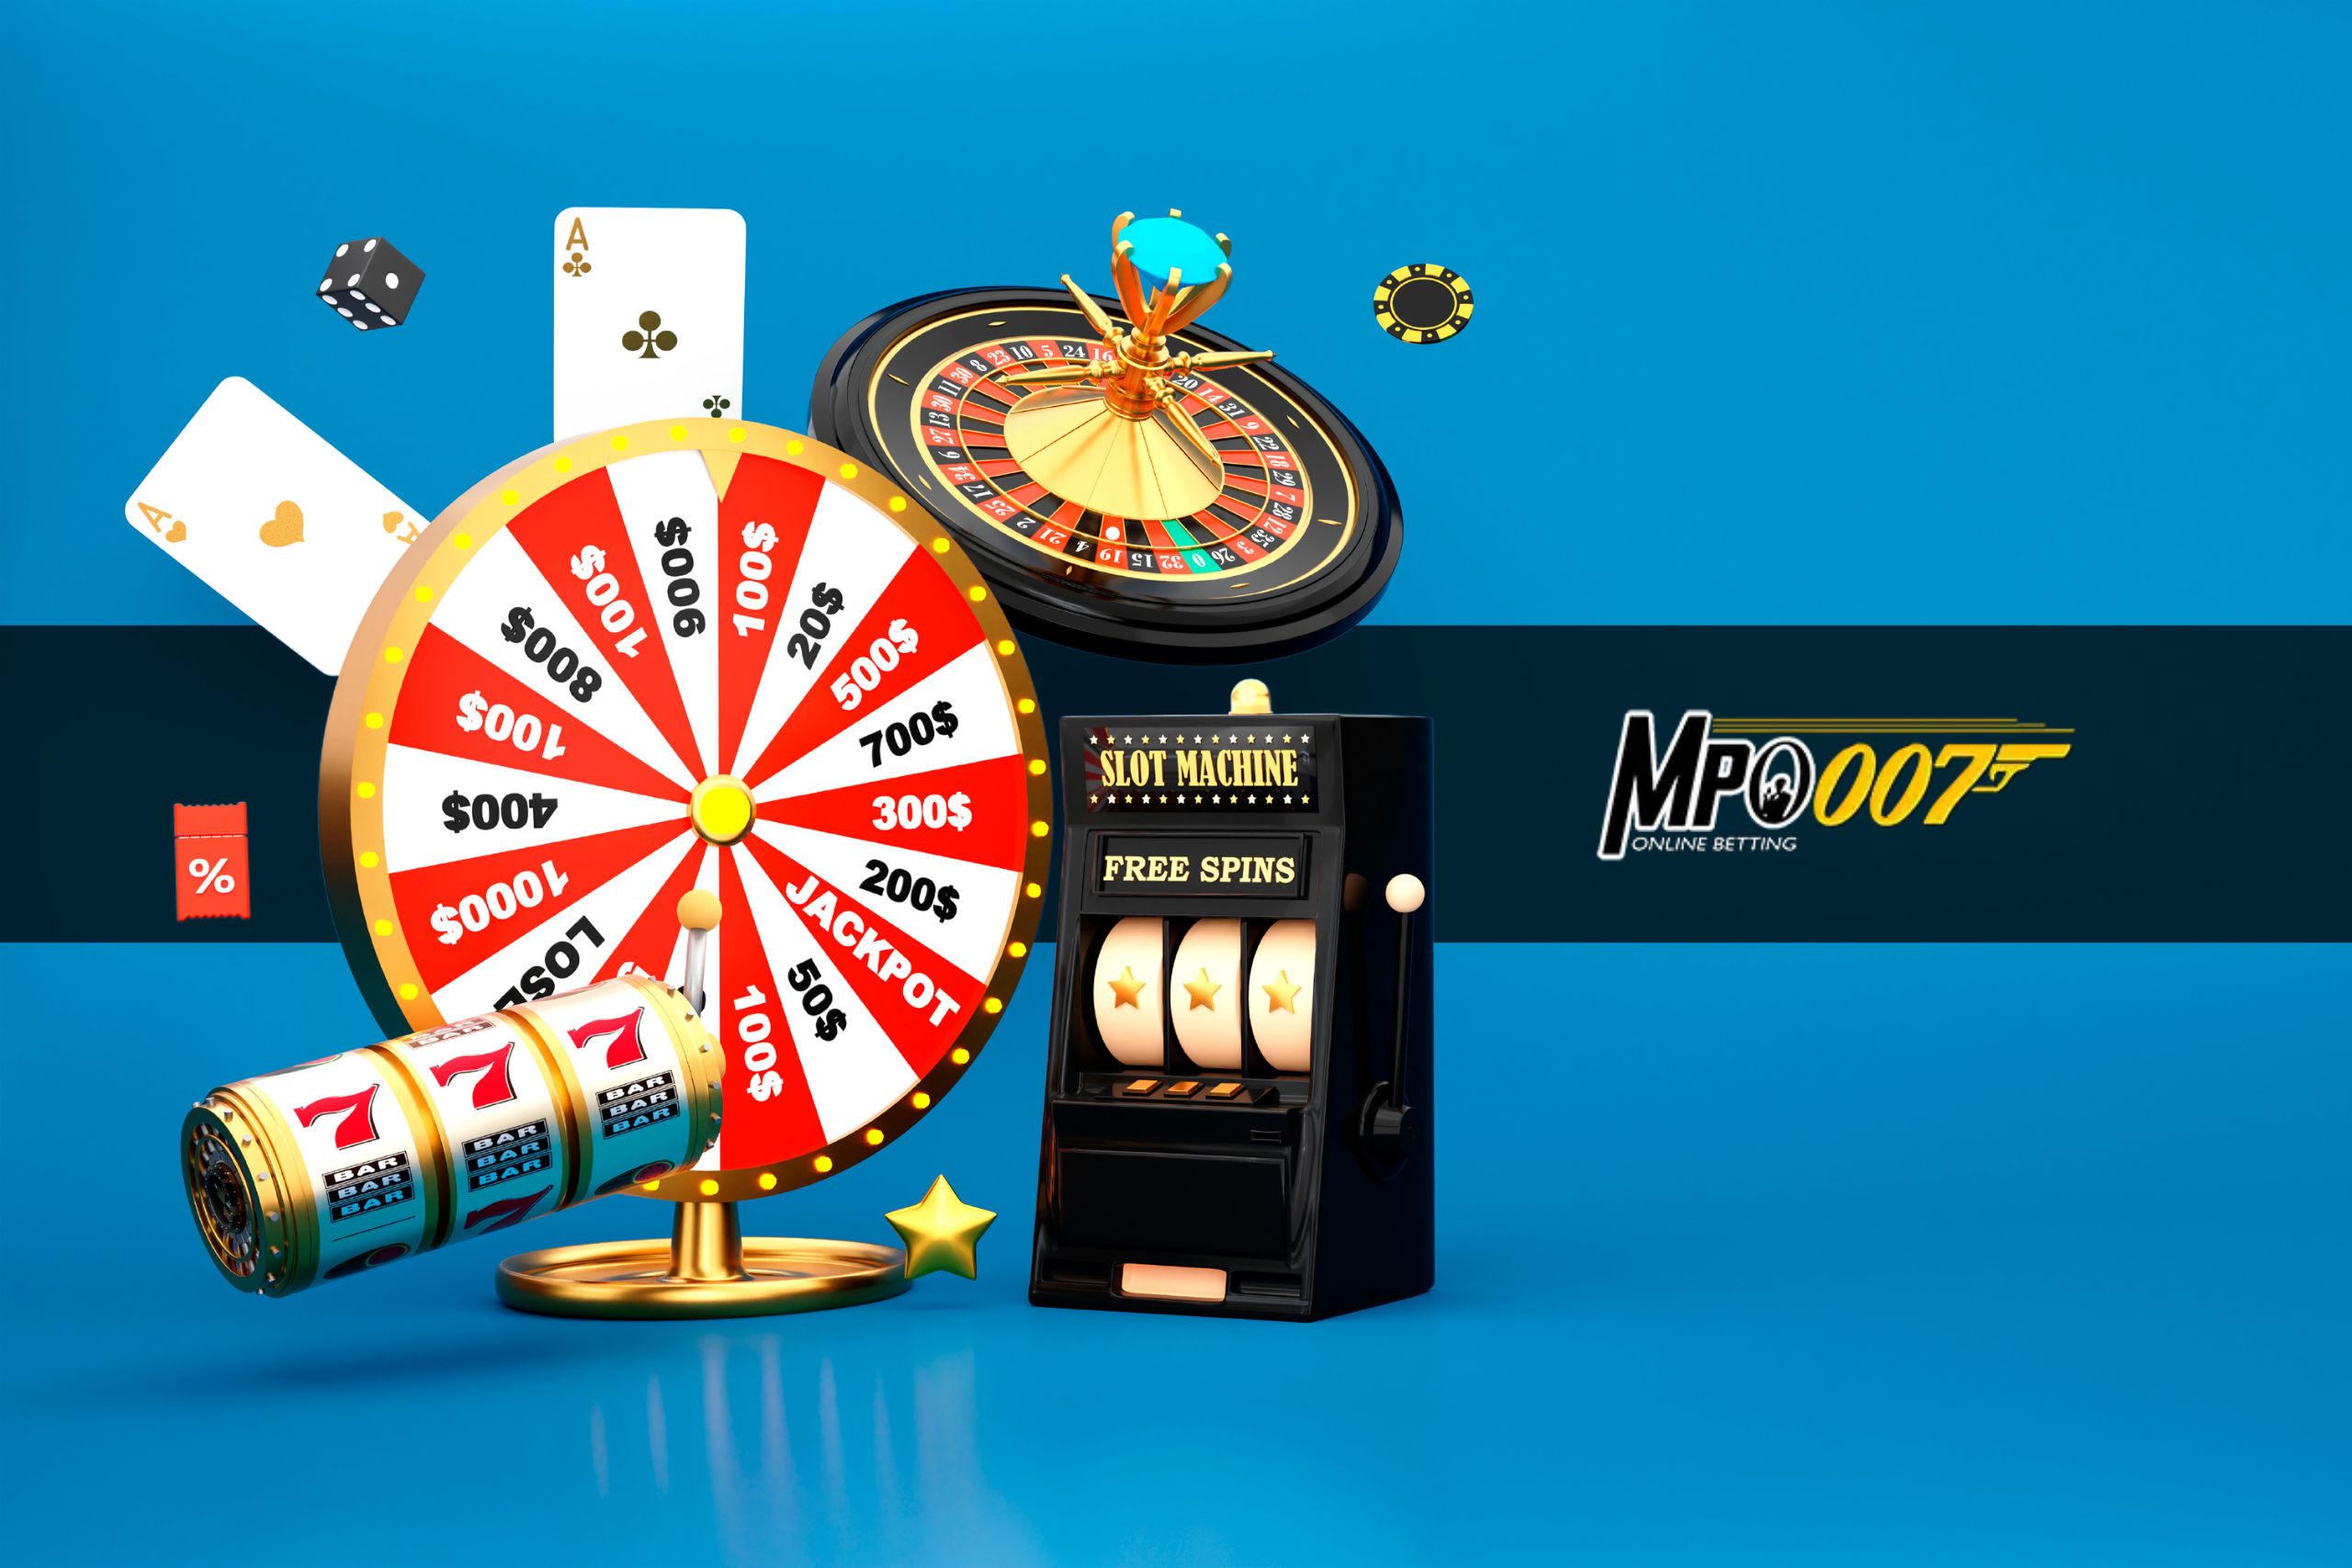 The Top Bonuses And Promotions At MPO007 Online Casino